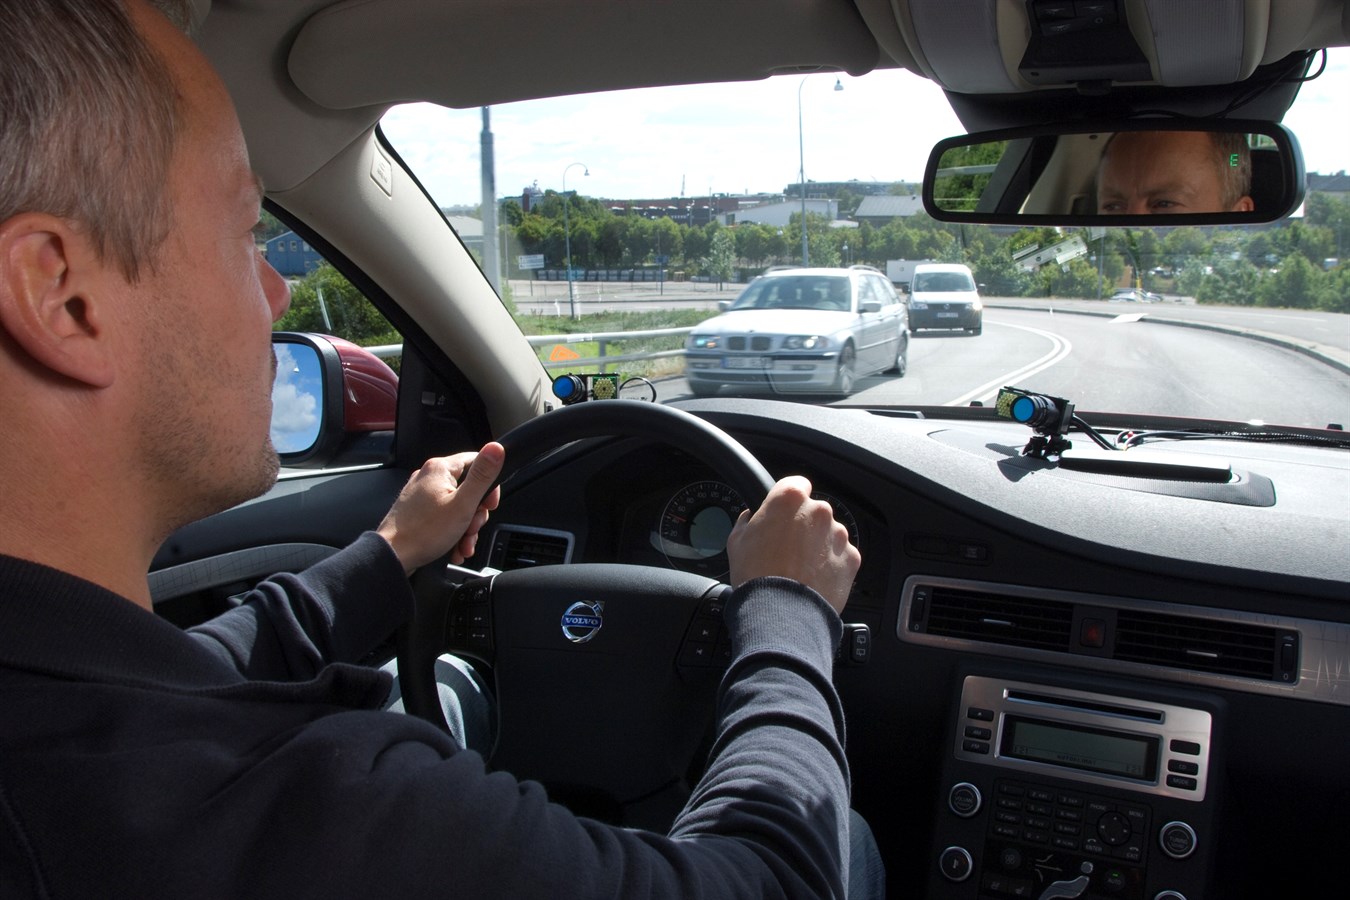 SAFER – Eyetracker. Field operational tests - The driver's behaviour is measured, eye movements etc.